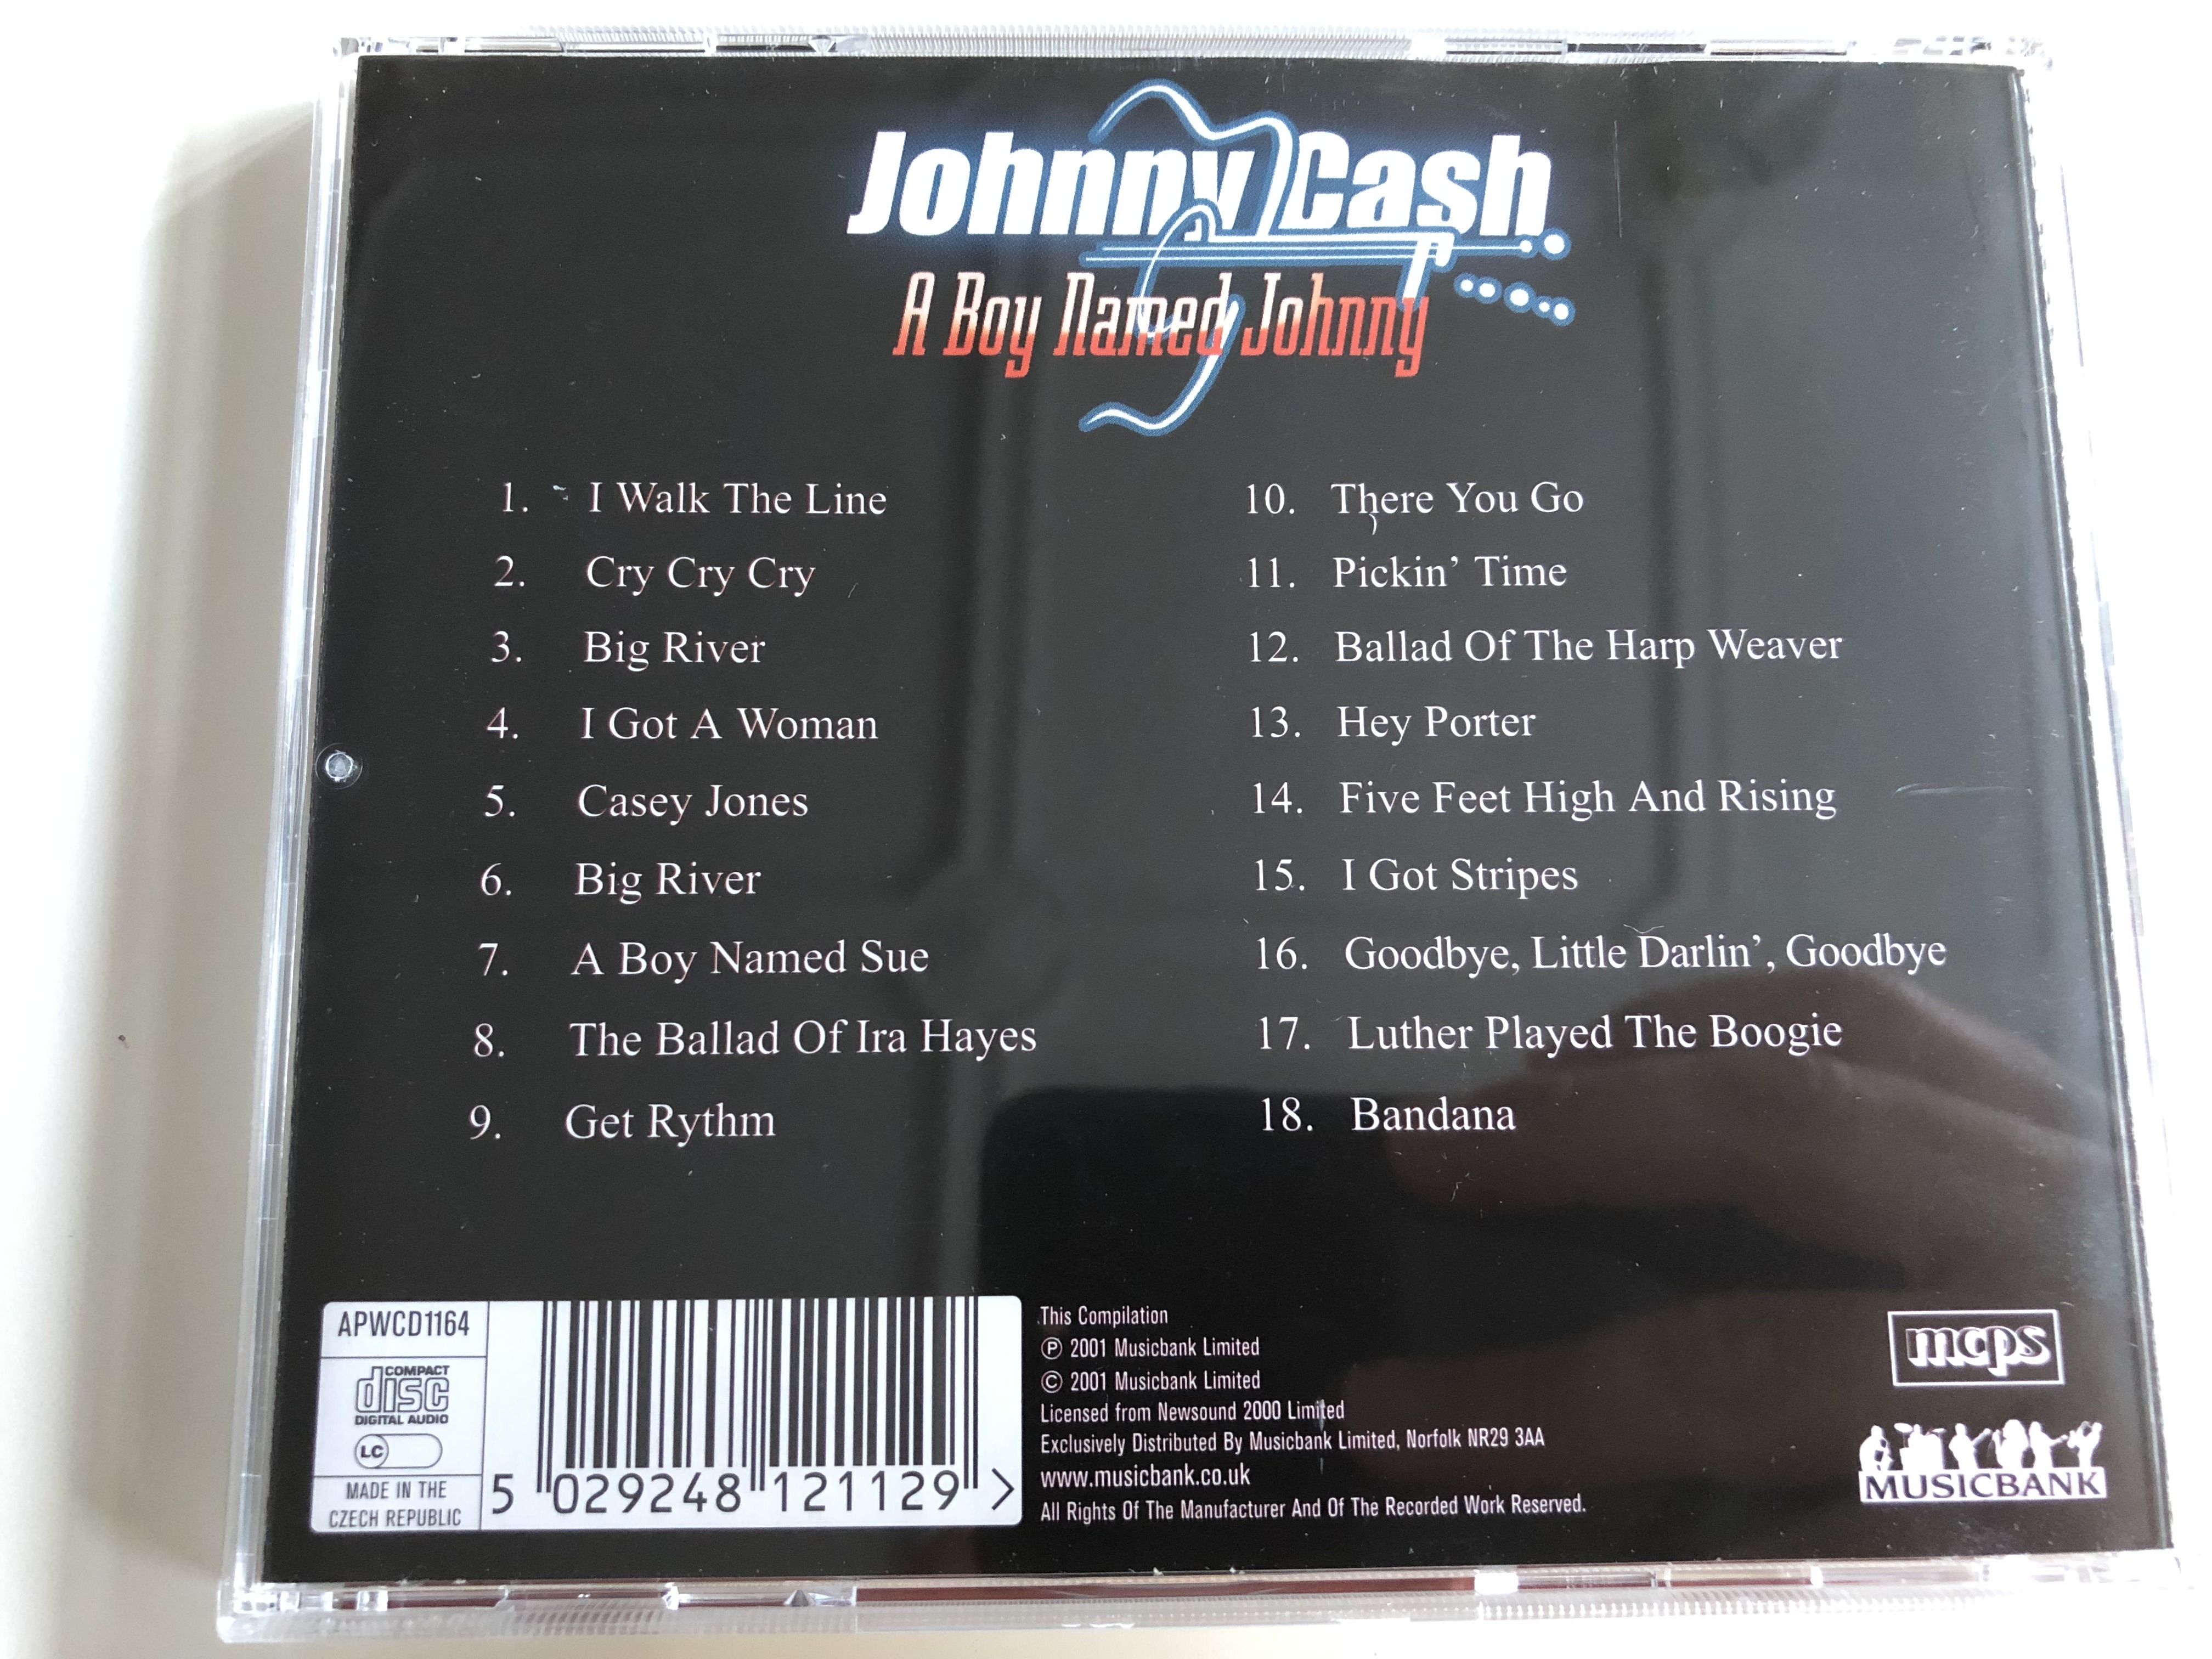 johnny-cash-a-boy-named-johnny-including-i-walk-the-line-get-rhythm-there-you-go-bandana-and-many-more...-audio-cd-2001-apwcd-1164-6-.jpg